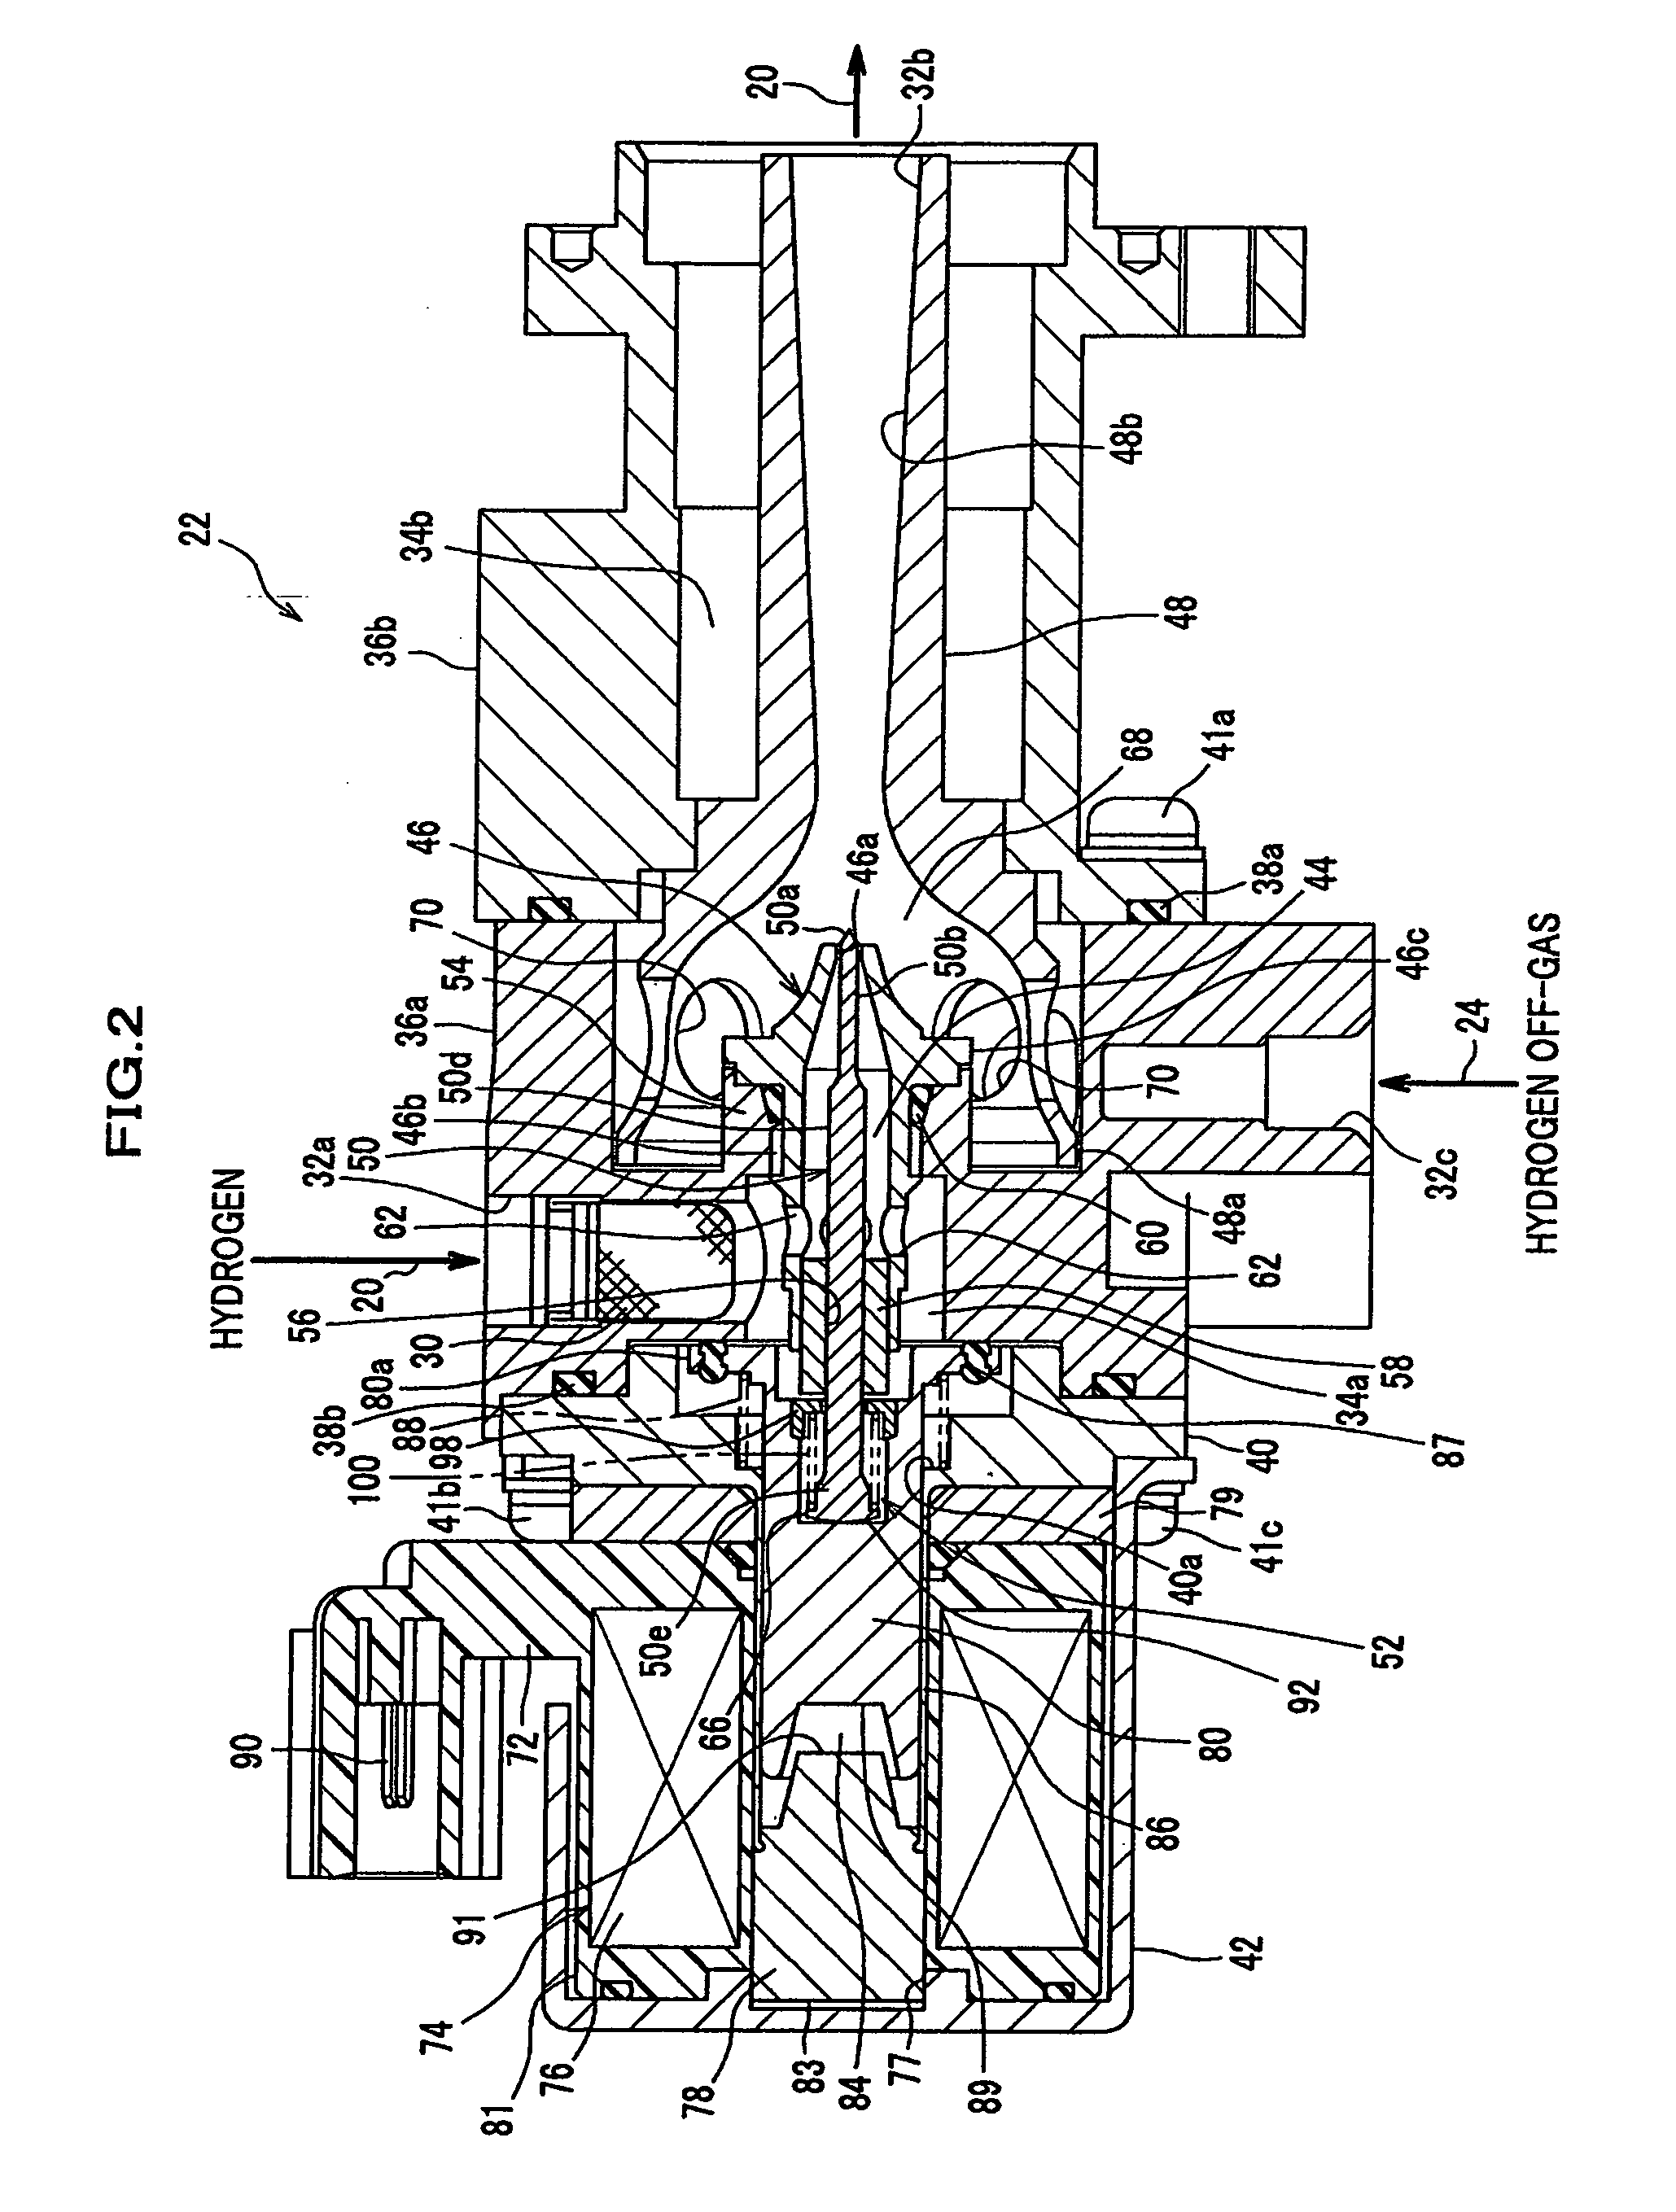 Ejector for fuel cell system